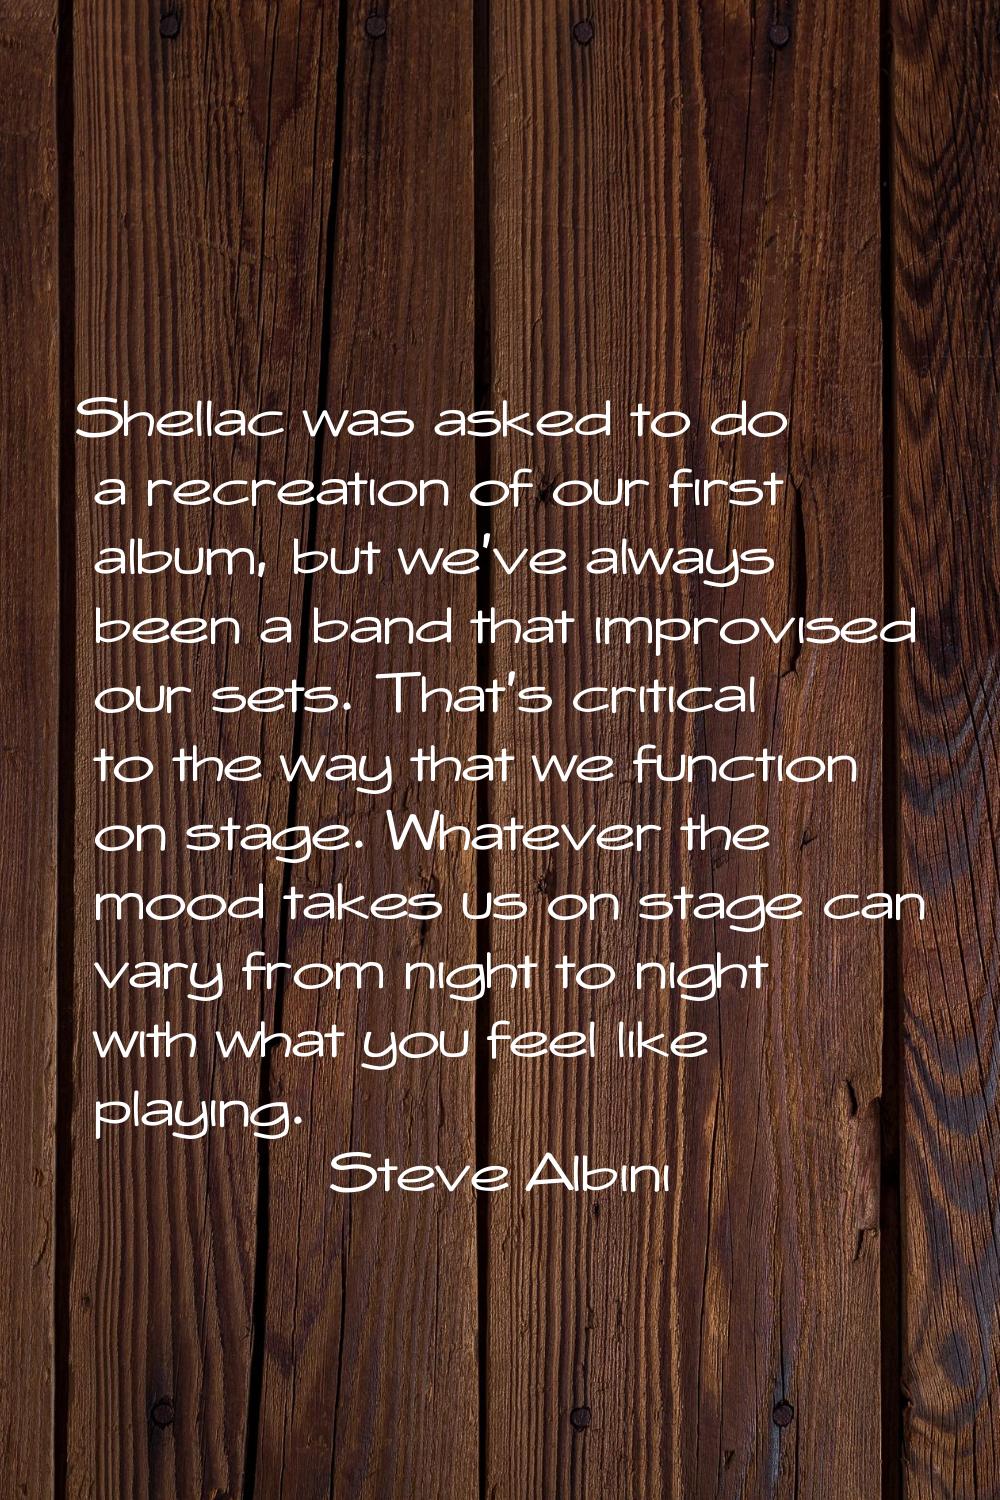 Shellac was asked to do a recreation of our first album, but we've always been a band that improvis